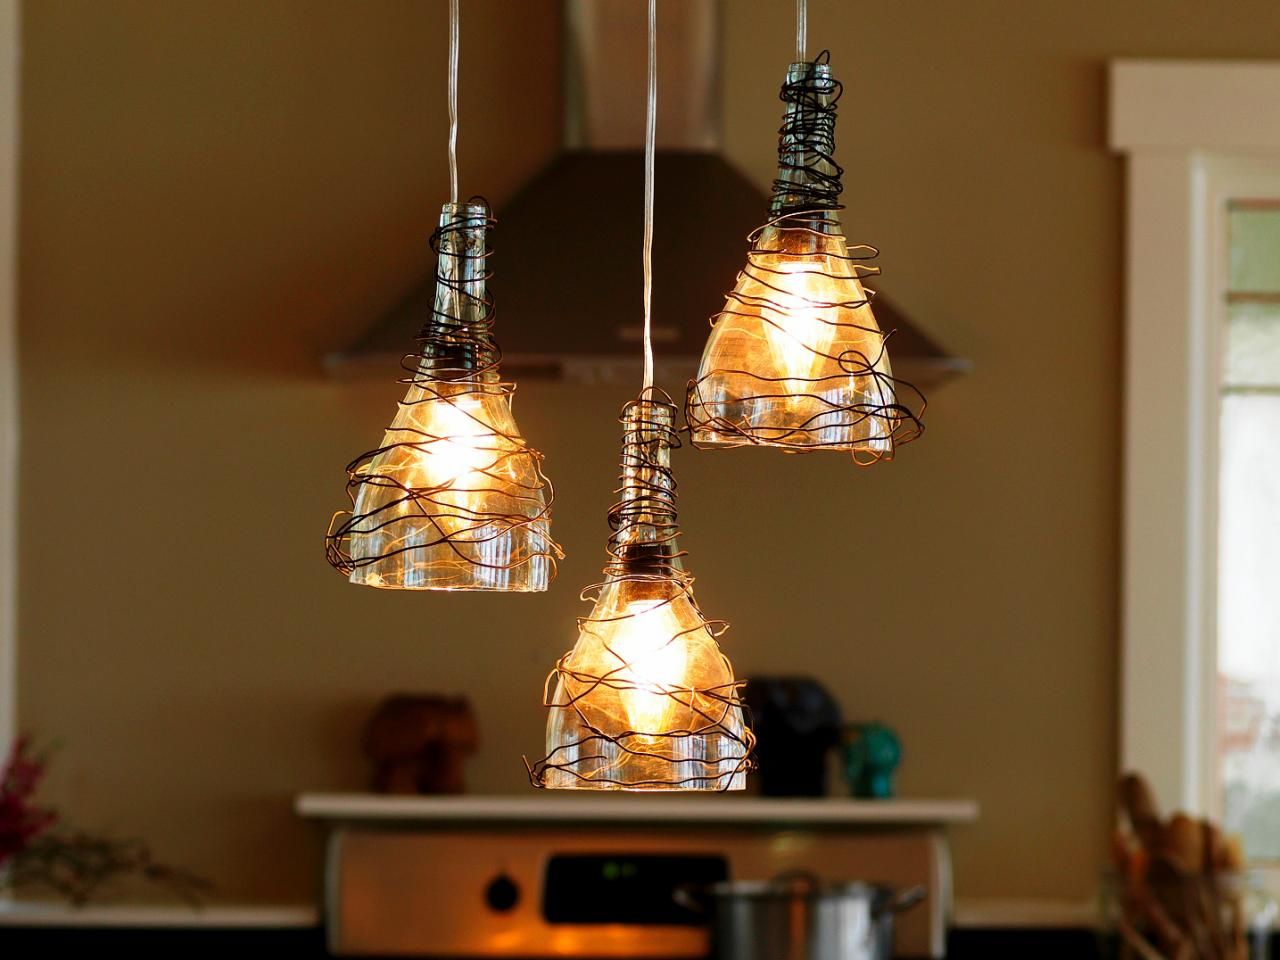 How to make a pendant lighting chandelier from glass bottles